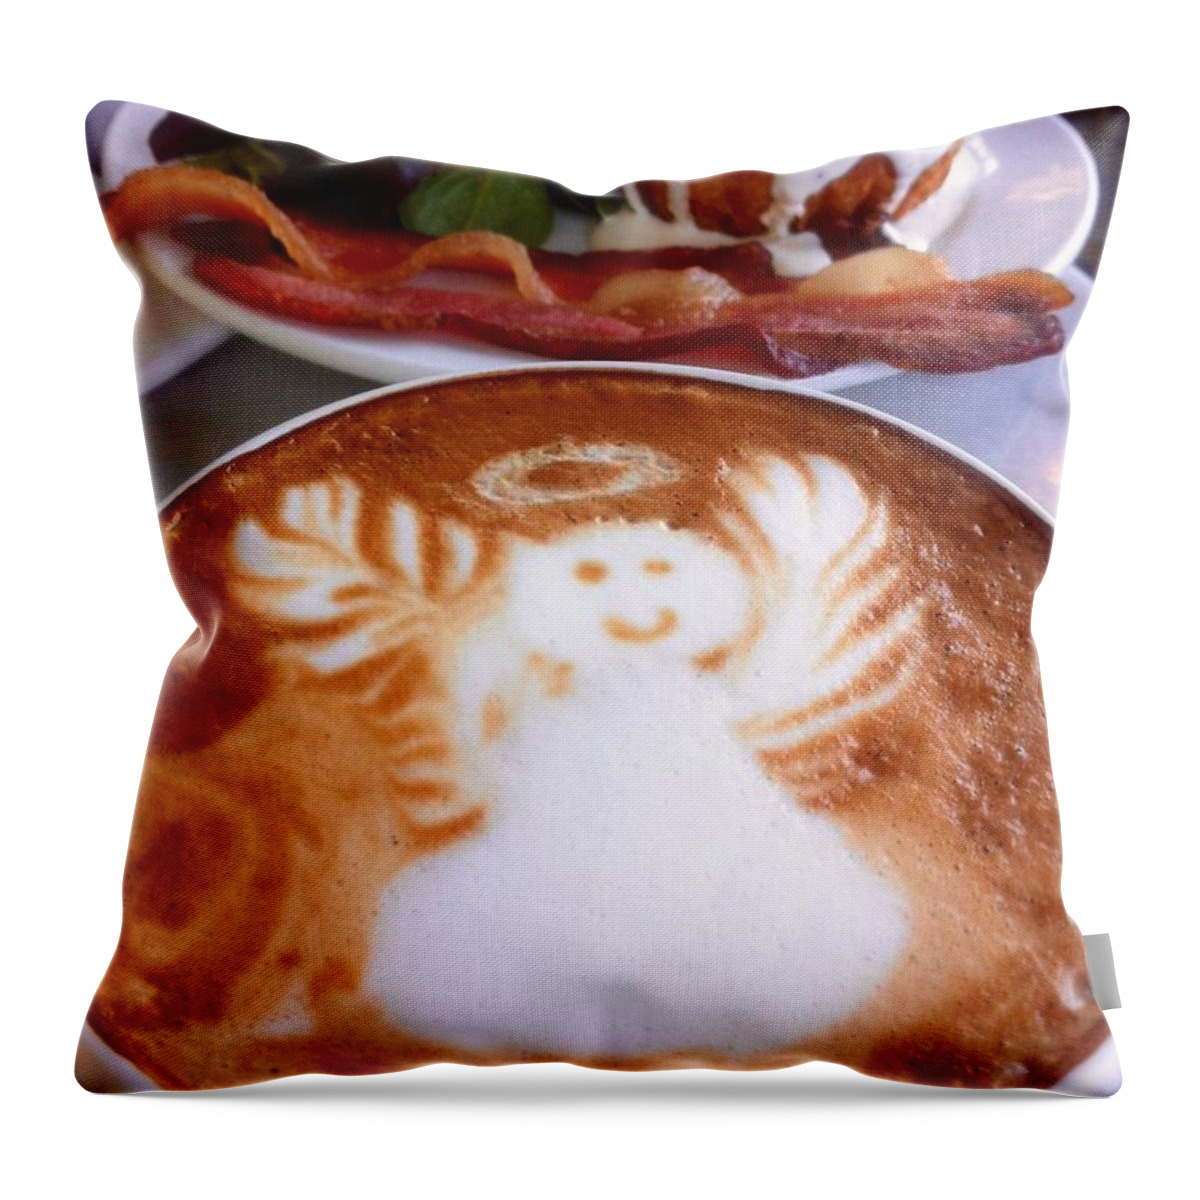 Saint Honore Latte Throw Pillow featuring the photograph Breakfast With An Angel Latte by Susan Garren